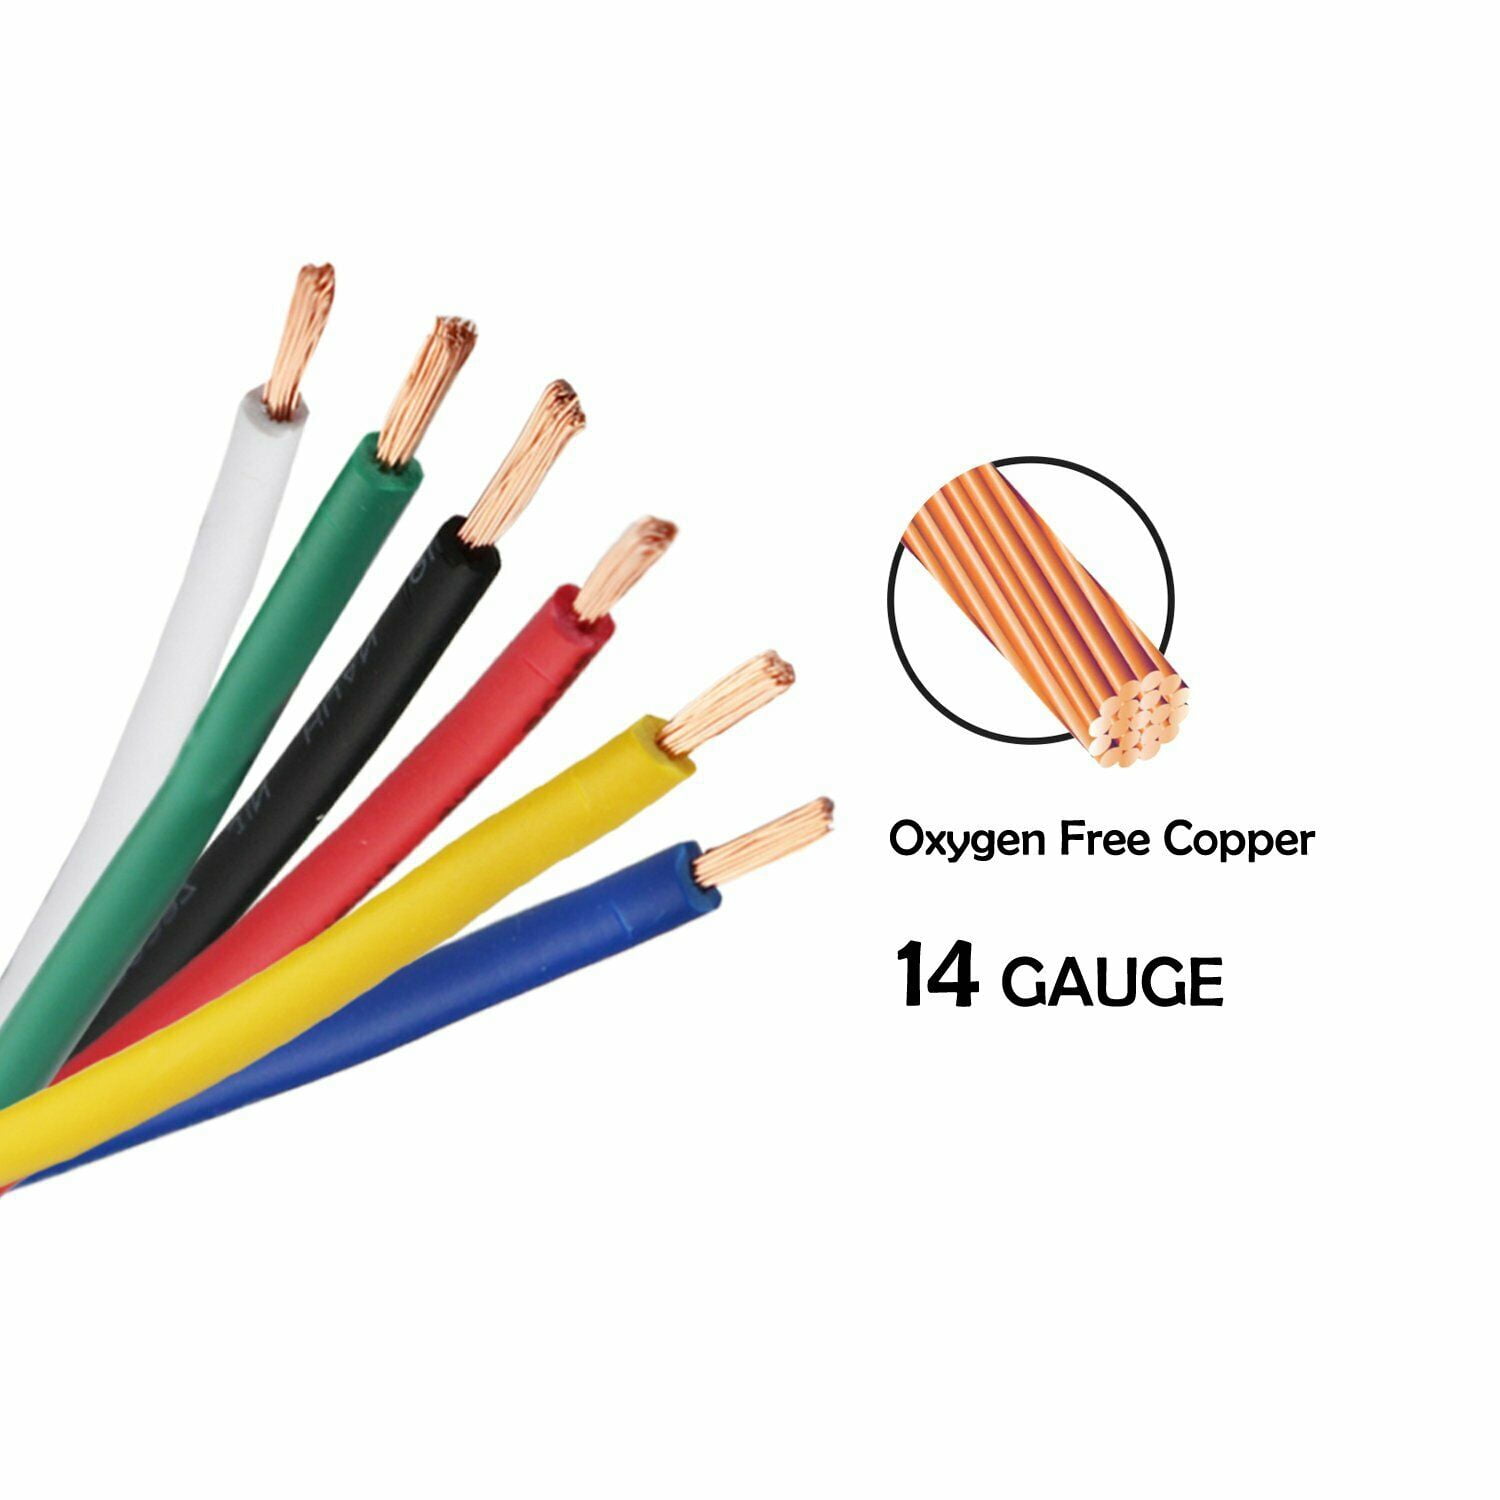 Oxygen Free Copper Power Wire 14 Gauge Auto Stranded Primary Cable Wiring 16ft/35ft/60ft/100ft/ ea 6color Set, Size: 60ft * 6Color, Red